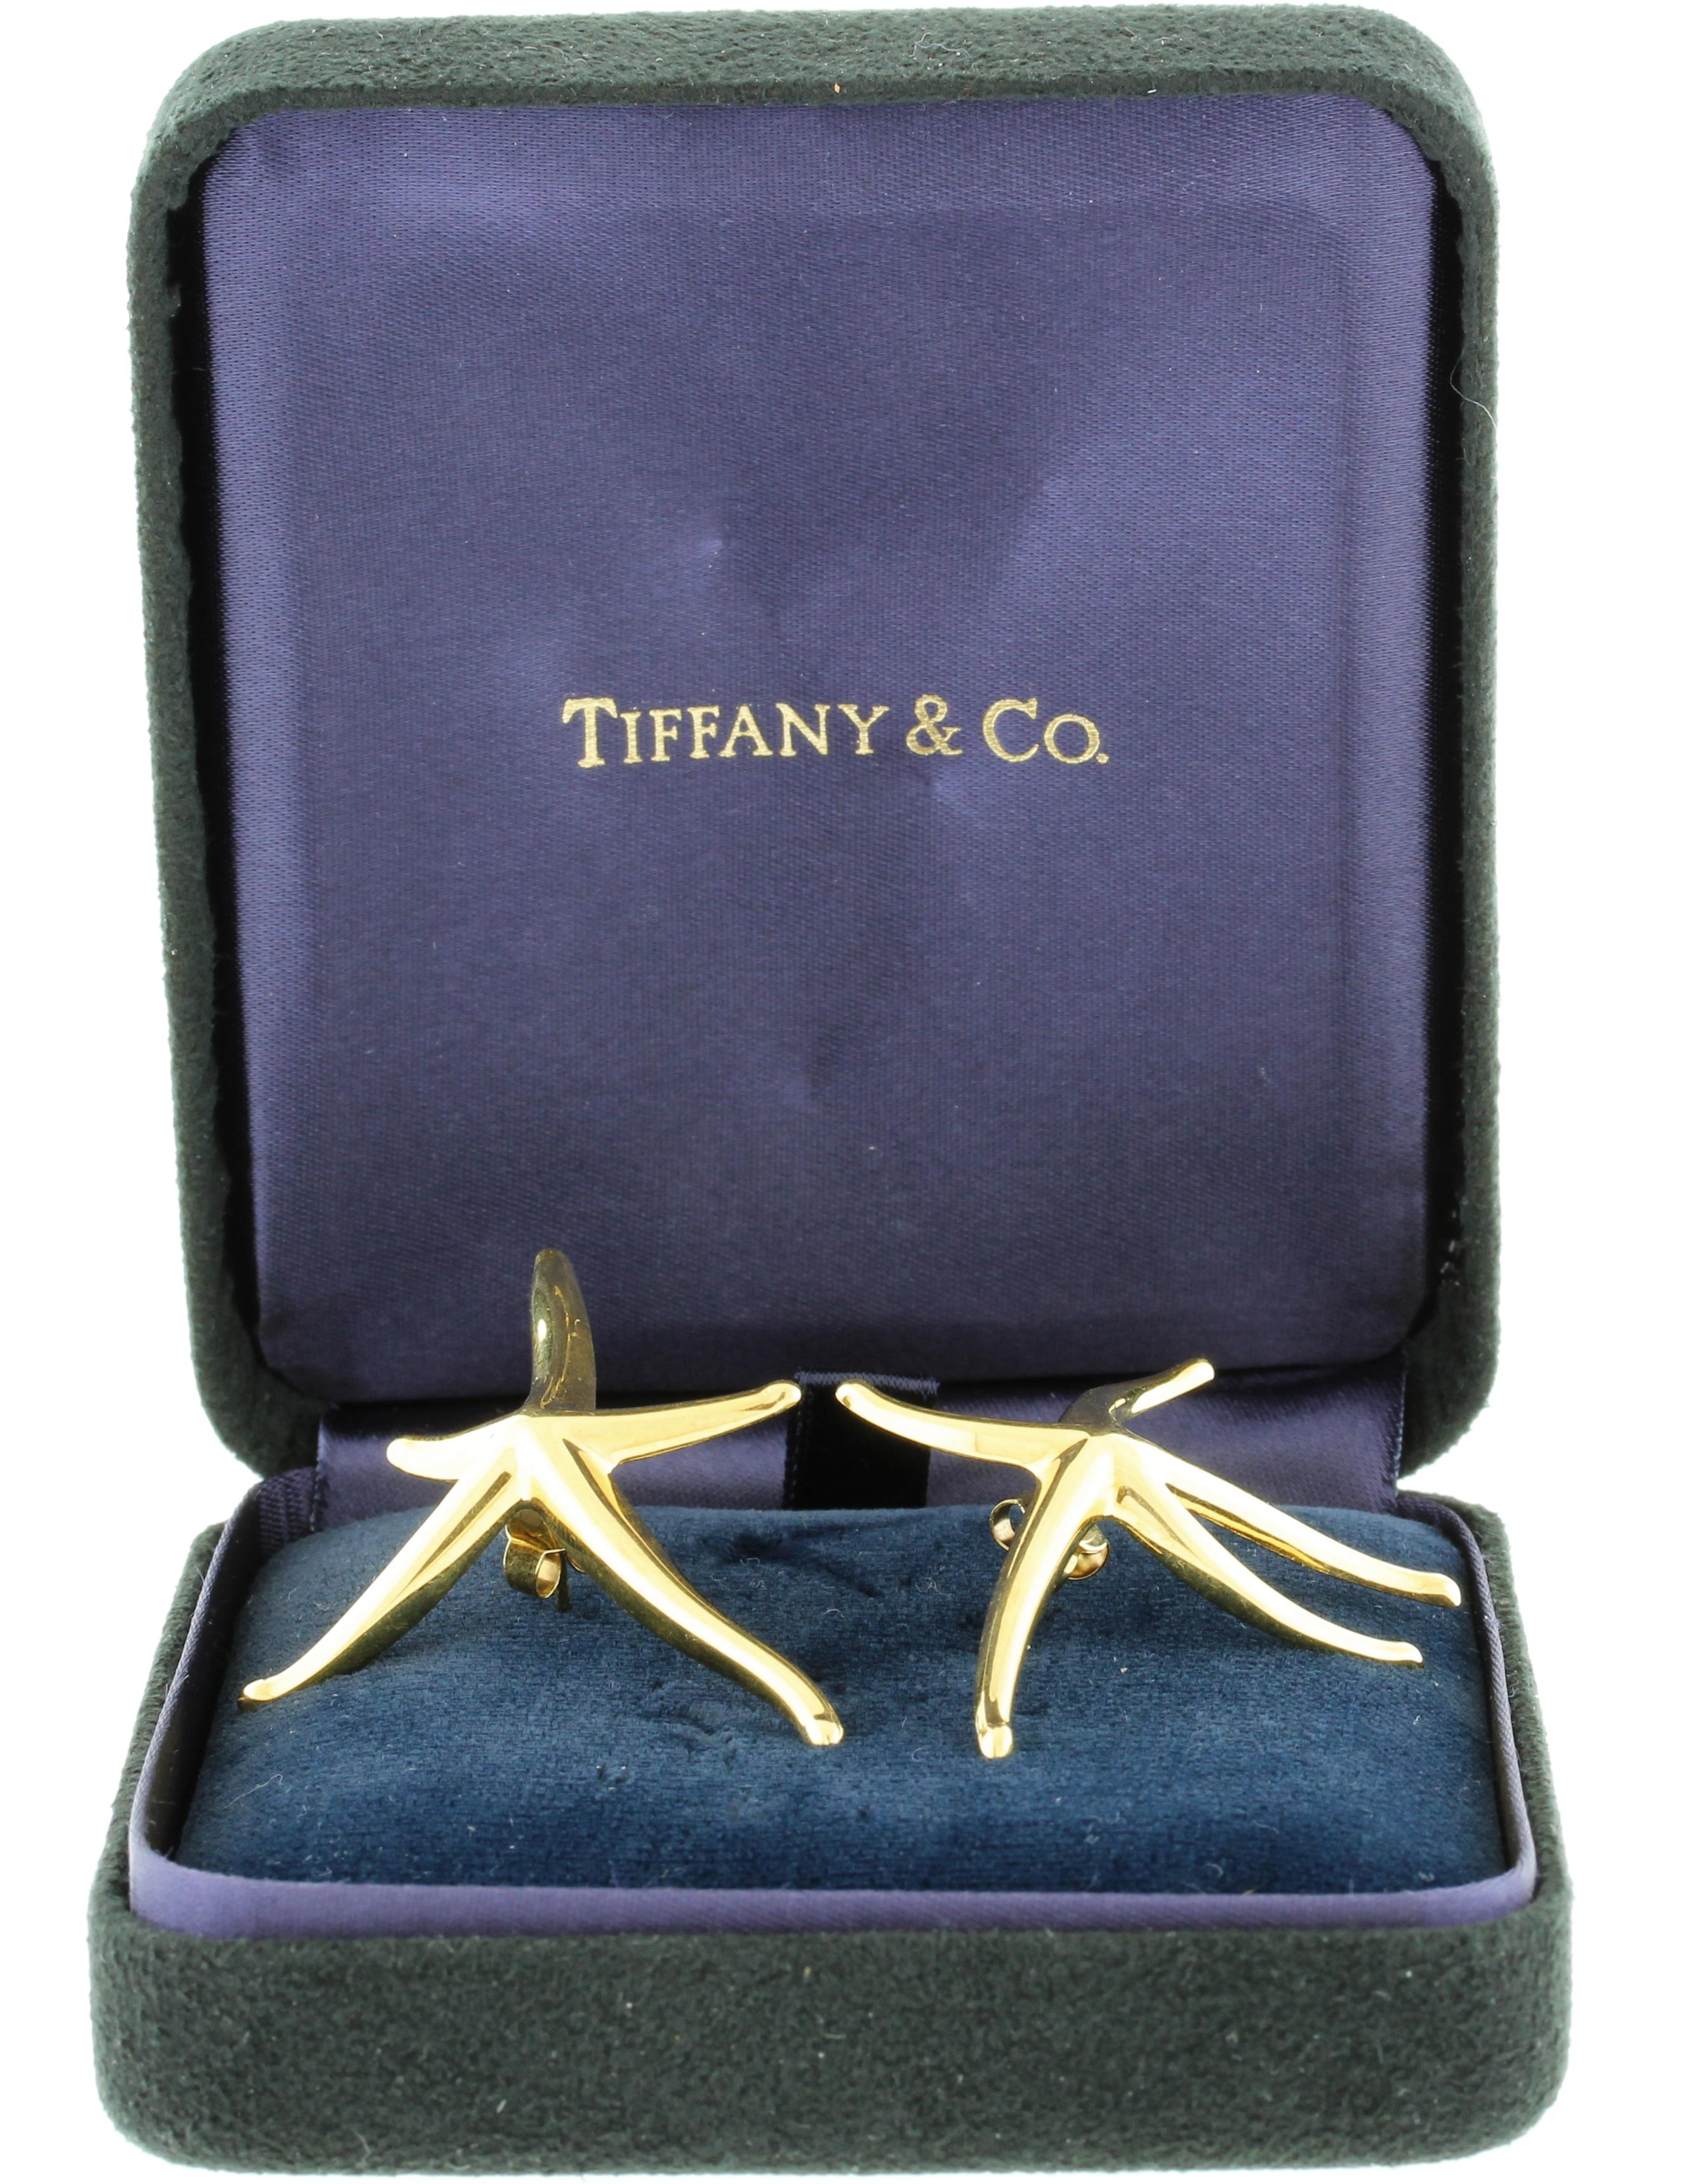 From Tiffany, Elsa Peretti created these large starfish earrings.  The earrings are stamped E.P, Spain, T&Co and 18kt.
♦ Designer: Elsa Peretti for Tiffany & Co.
♦ Metal: 18 karat yellow gold
♦ Weight: 9.8 grams
♦ Diameter: 2in
♦ Packaging:Tiffany